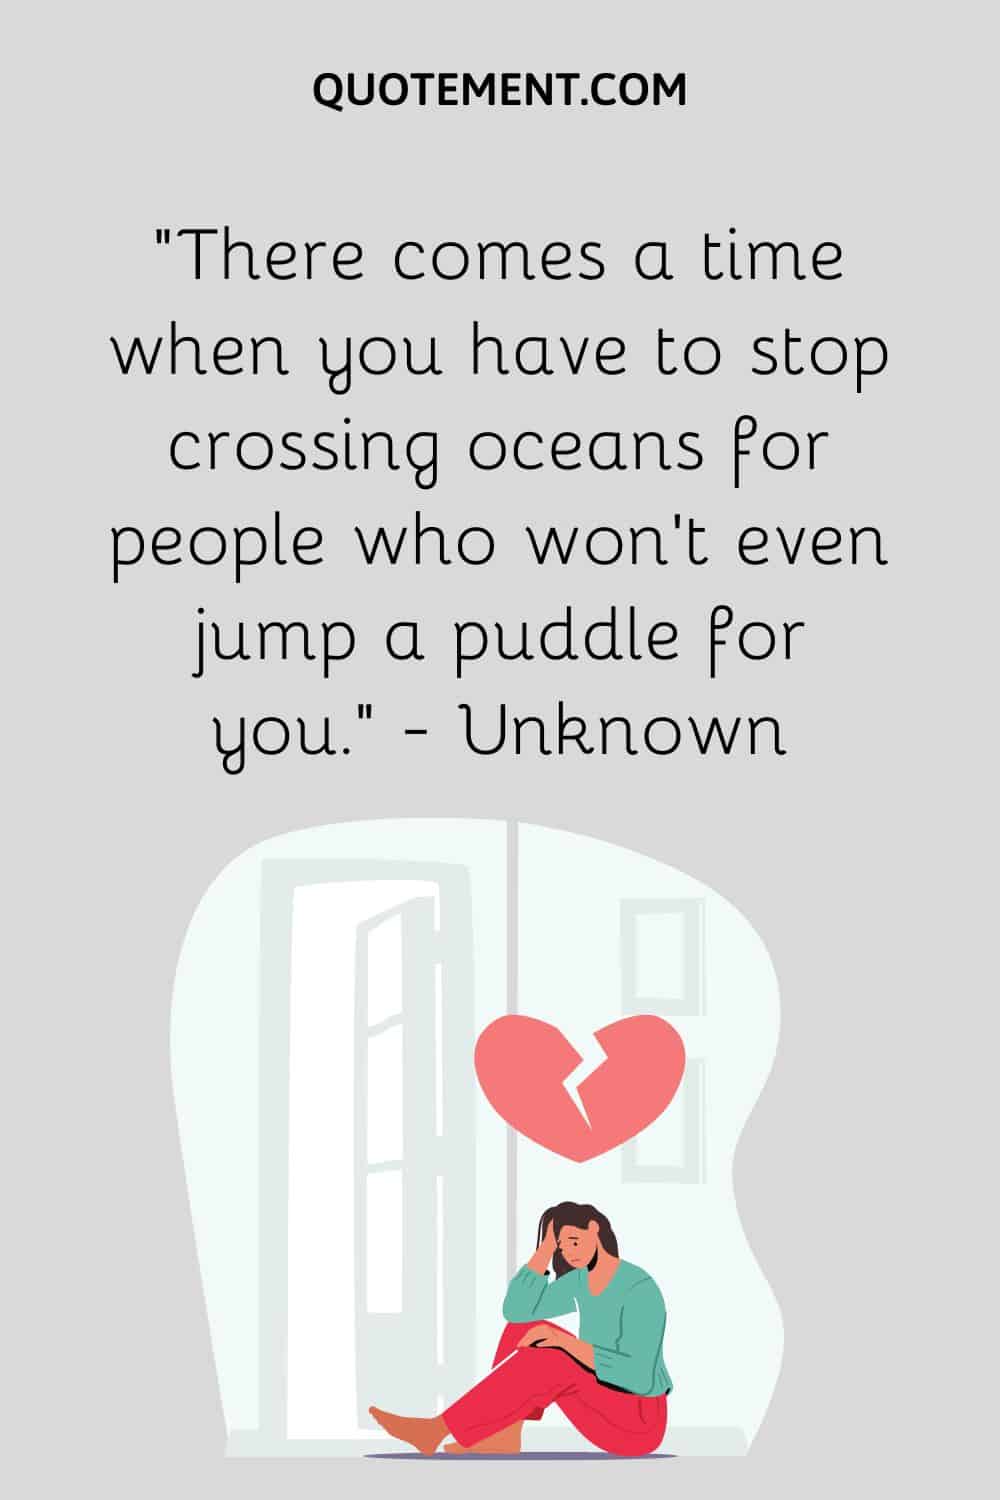 There comes a time when you have to stop crossing oceans for people who won’t even jump a puddle for you.